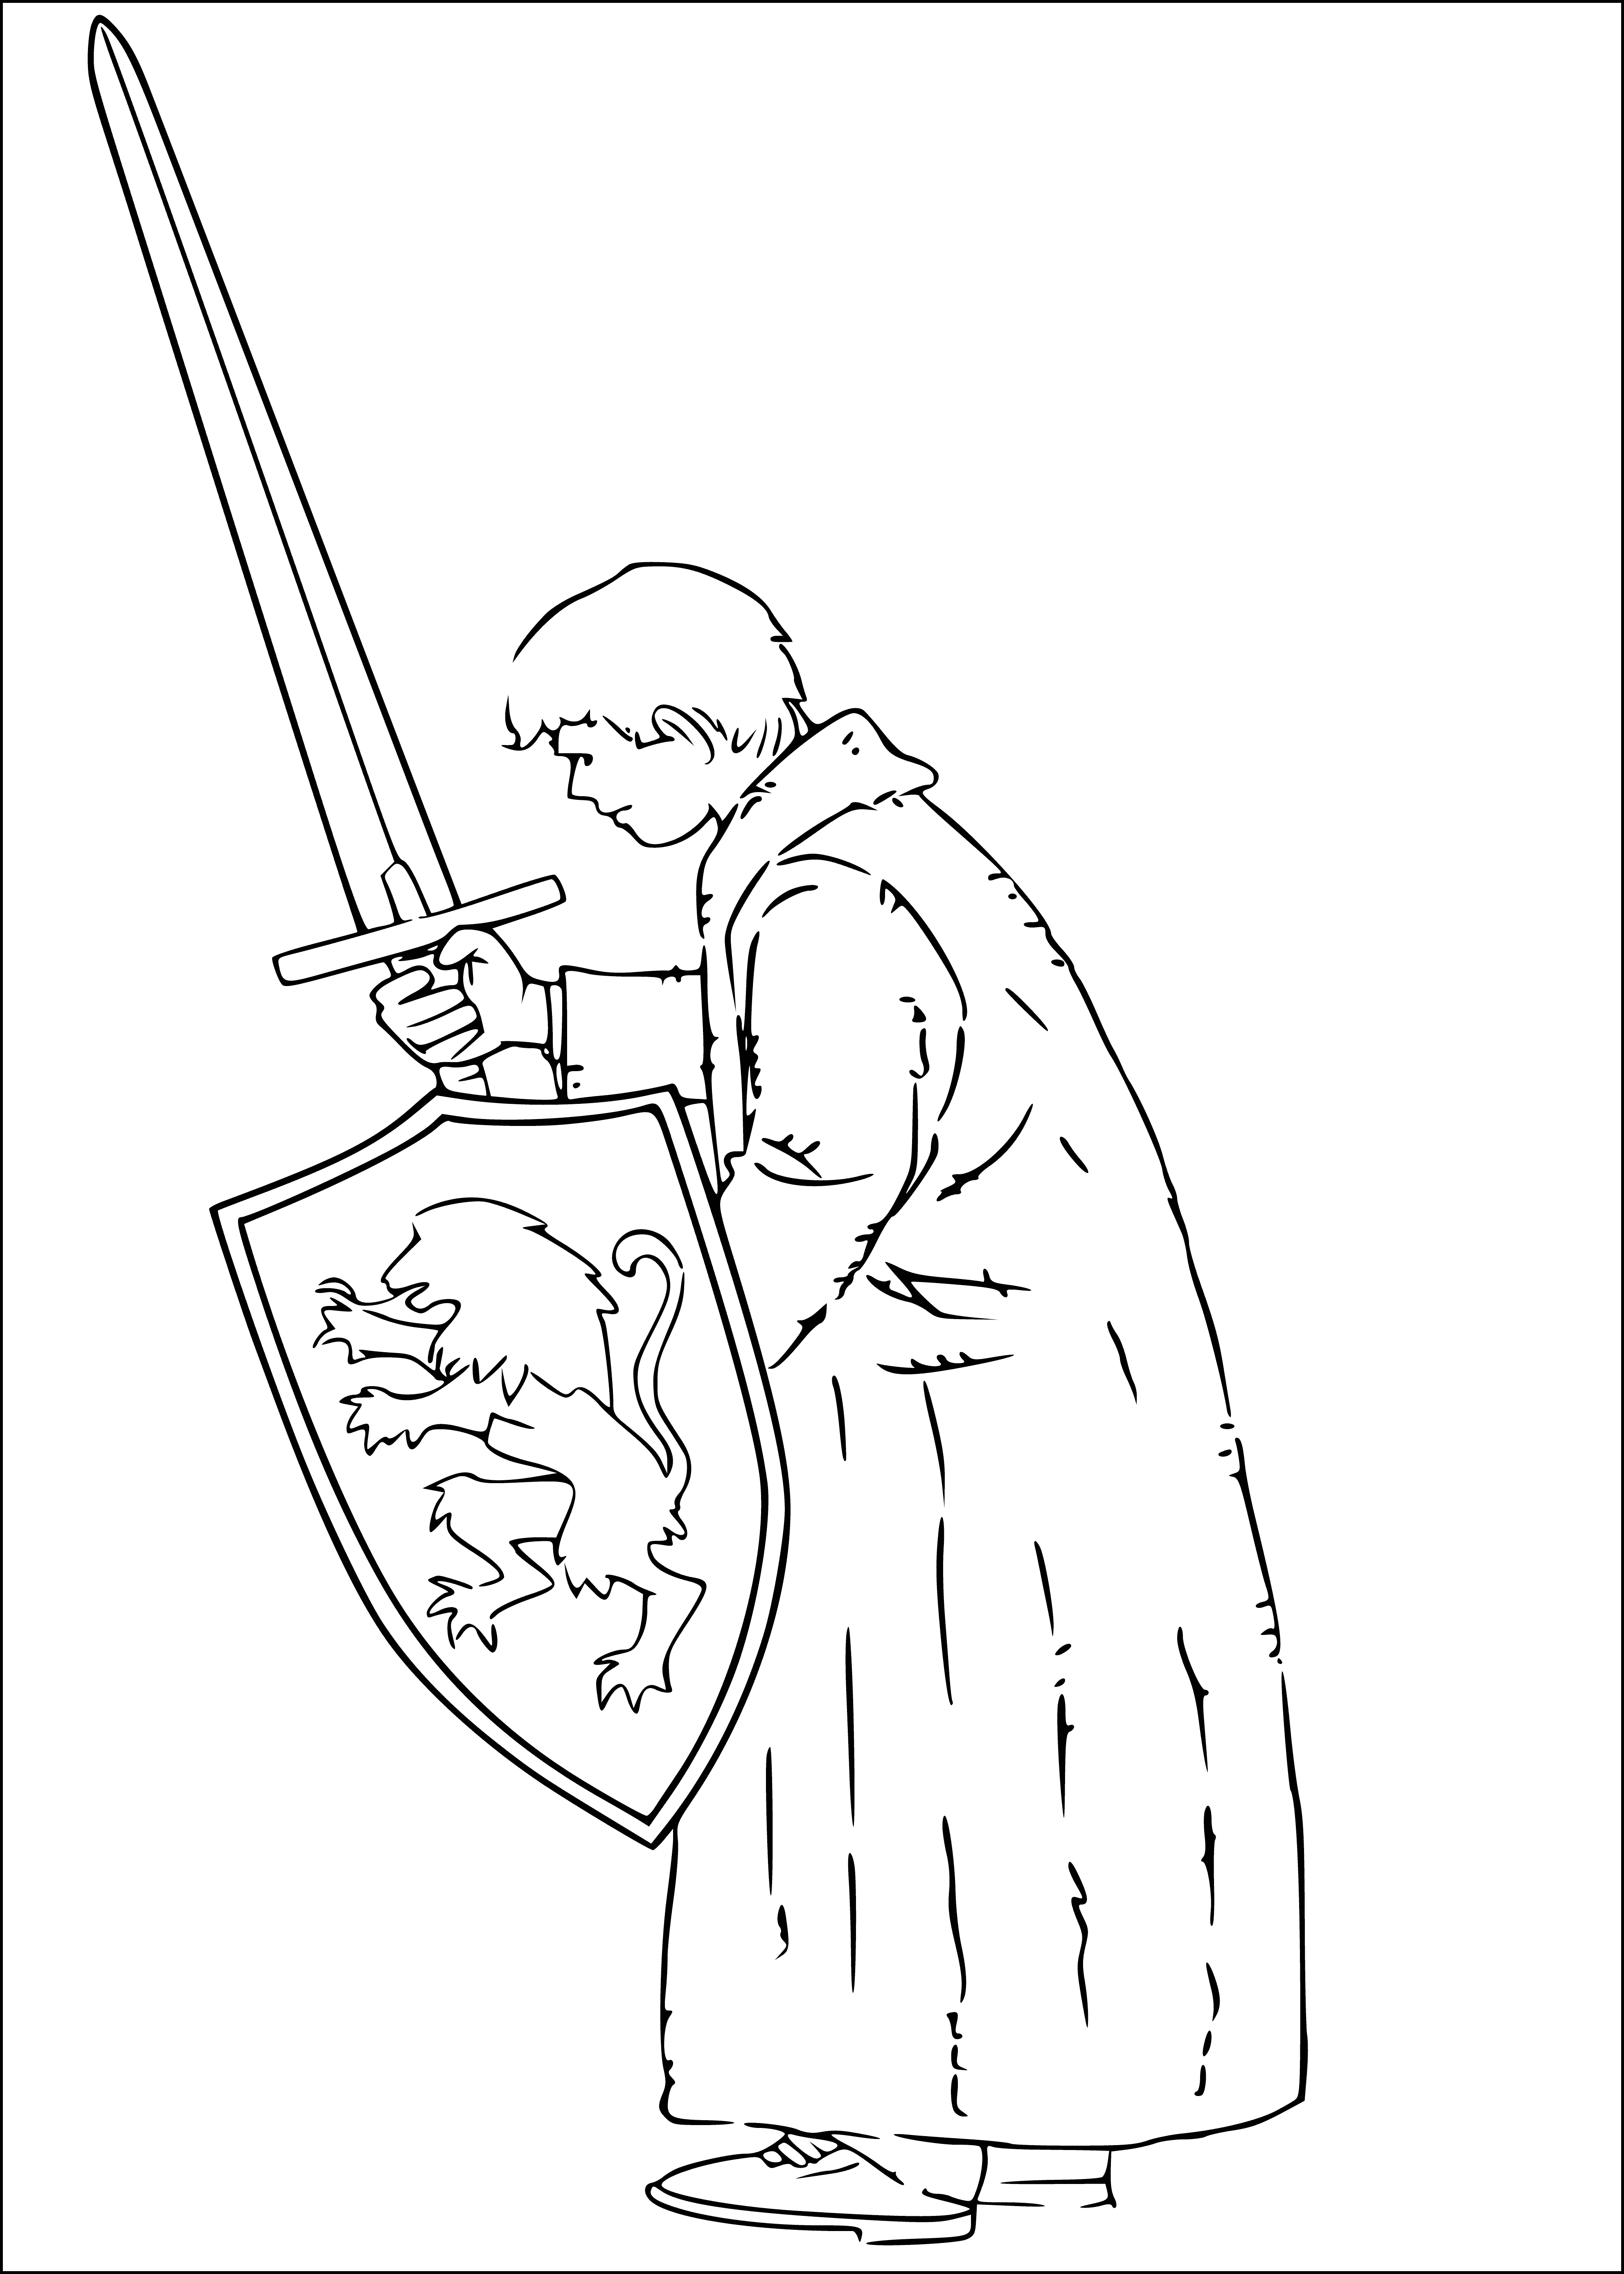 coloring page: Boy Peter holds sword, standing in front of large wardrobe with open door. Inside is a world of snow and ice. #fantasyworld